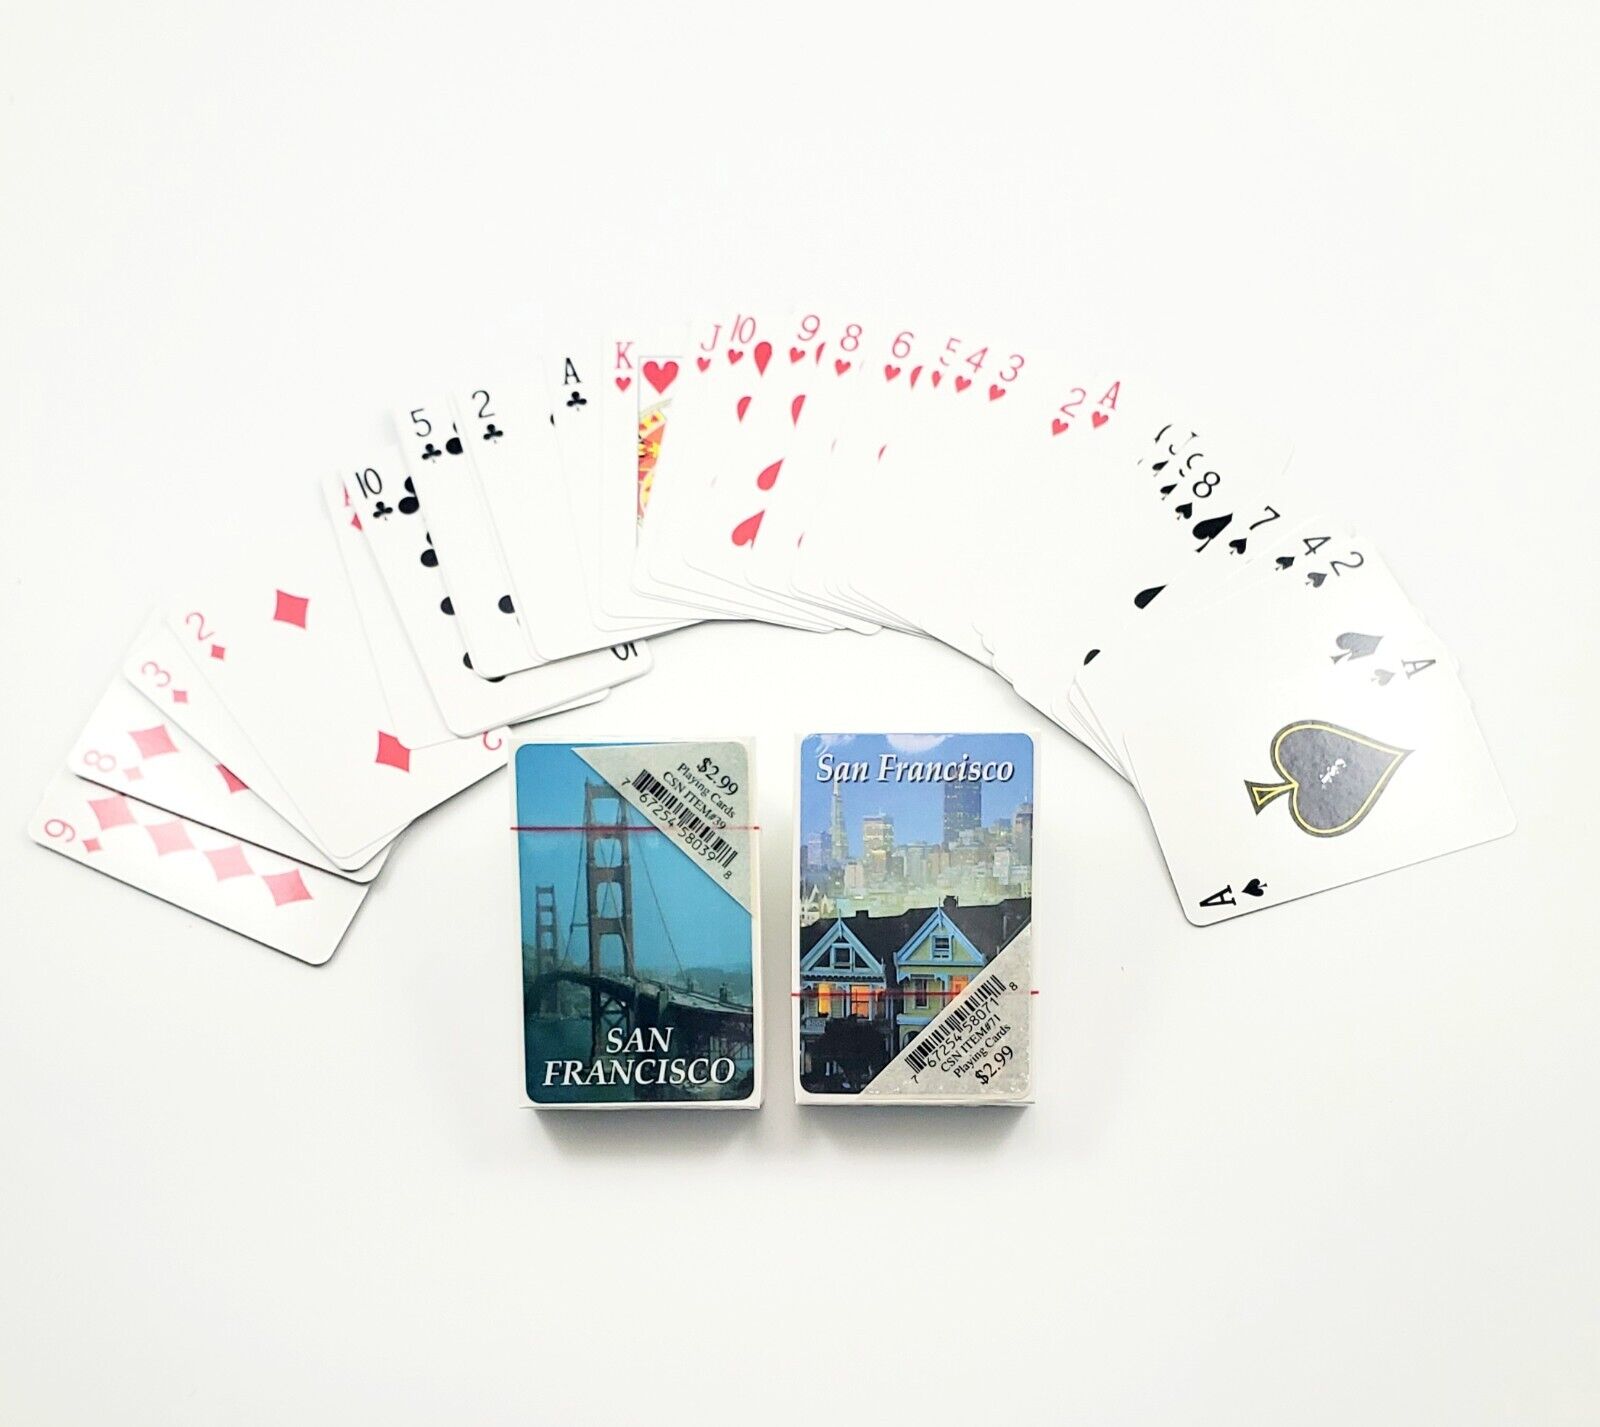 Lot of 24 Decks - San Francisco Themed Decks of Playing Cards